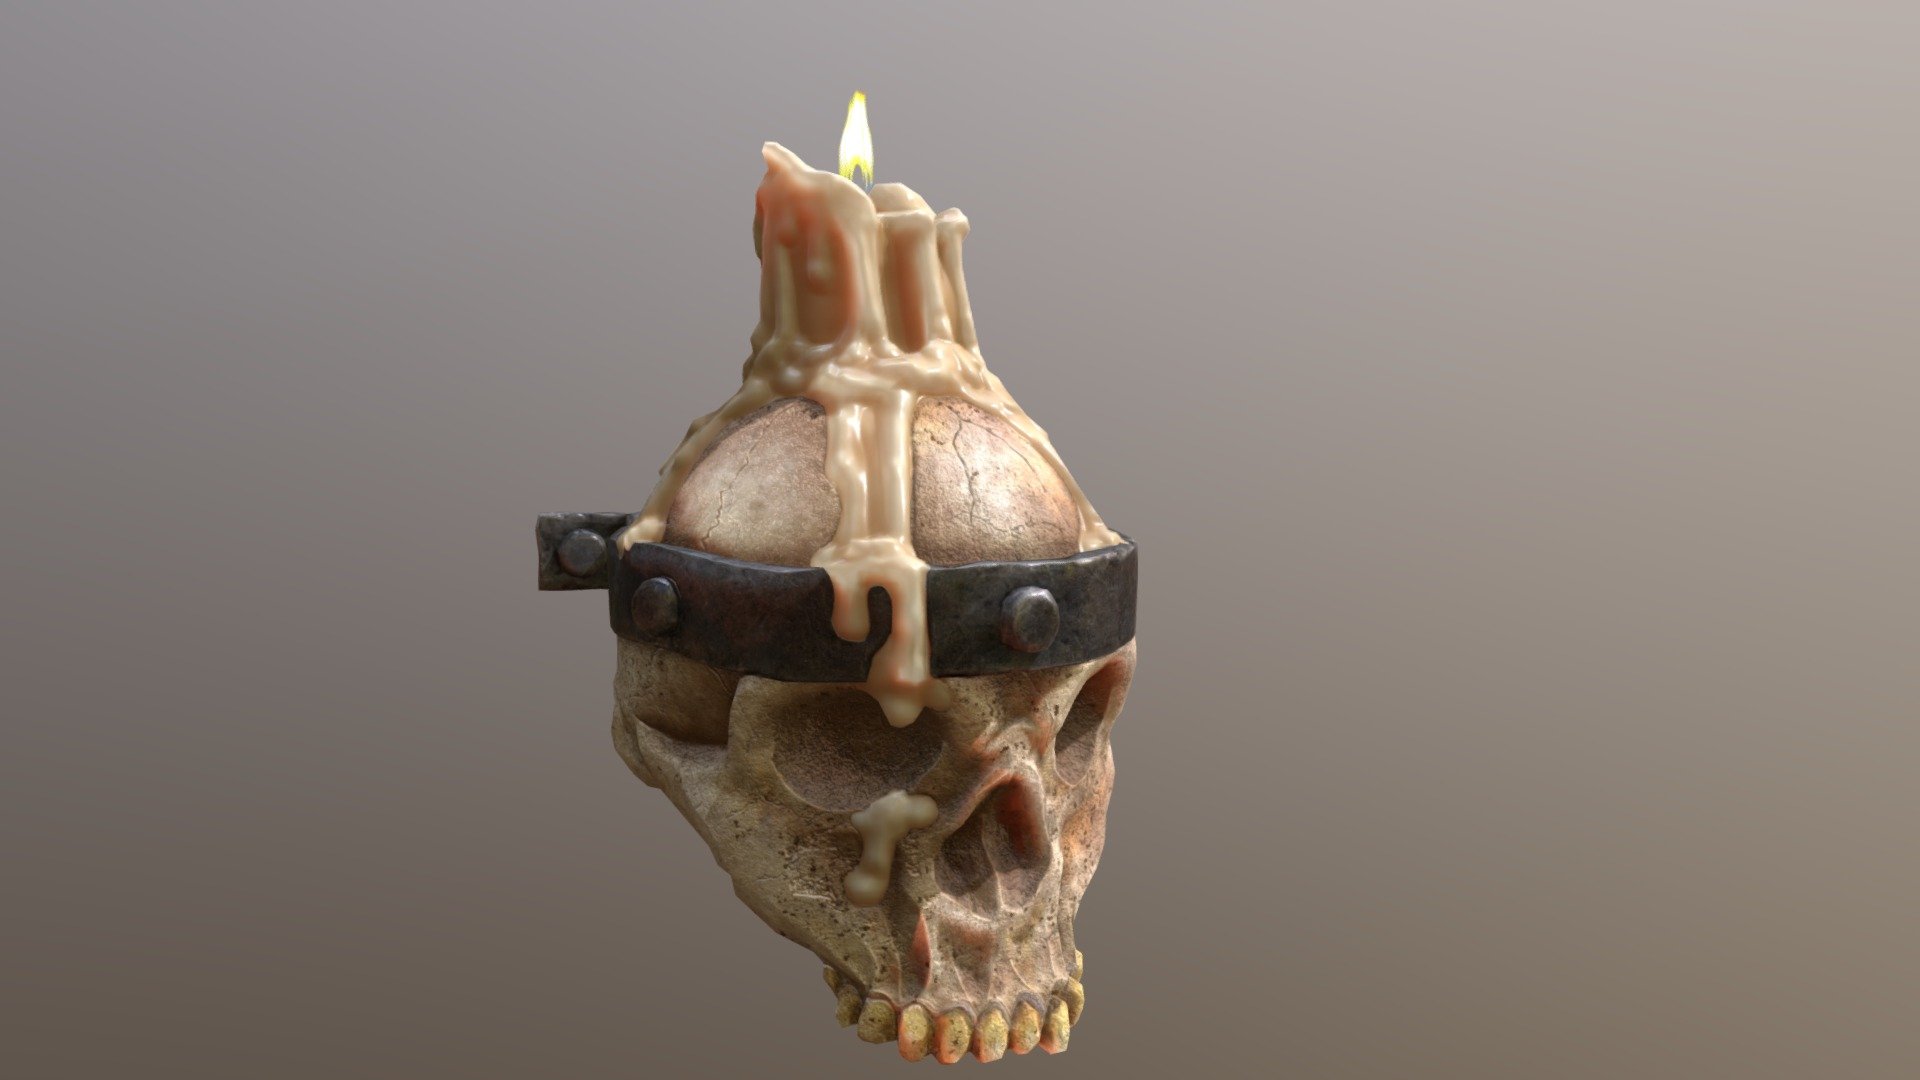 Halloween Spooky Wall Mounted Skull Candle 3D Model. This model contains the Halloween Spooky Wall Mounted Skull Candle itself 

All modeled in Maya, textured with Substance Painter.

The model was built to scale and is UV unwrapped properly. Contains a 4K and 2K texture set.  

⦁   6870 tris. 

⦁   Contains: .FBX .OBJ and .DAE

⦁   Model has clean topology. No Ngons.

⦁   Built to scale

⦁   Unwrapped UV Map

⦁   4K Texture set

⦁   High quality details

⦁   Based on real life references

⦁   Renders done in Marmoset Toolbag

Polycount: 

Verts 3509

Edges 7053 

Faces 3555

Tris 6870

If you have any questions please feel free to ask me 3d model